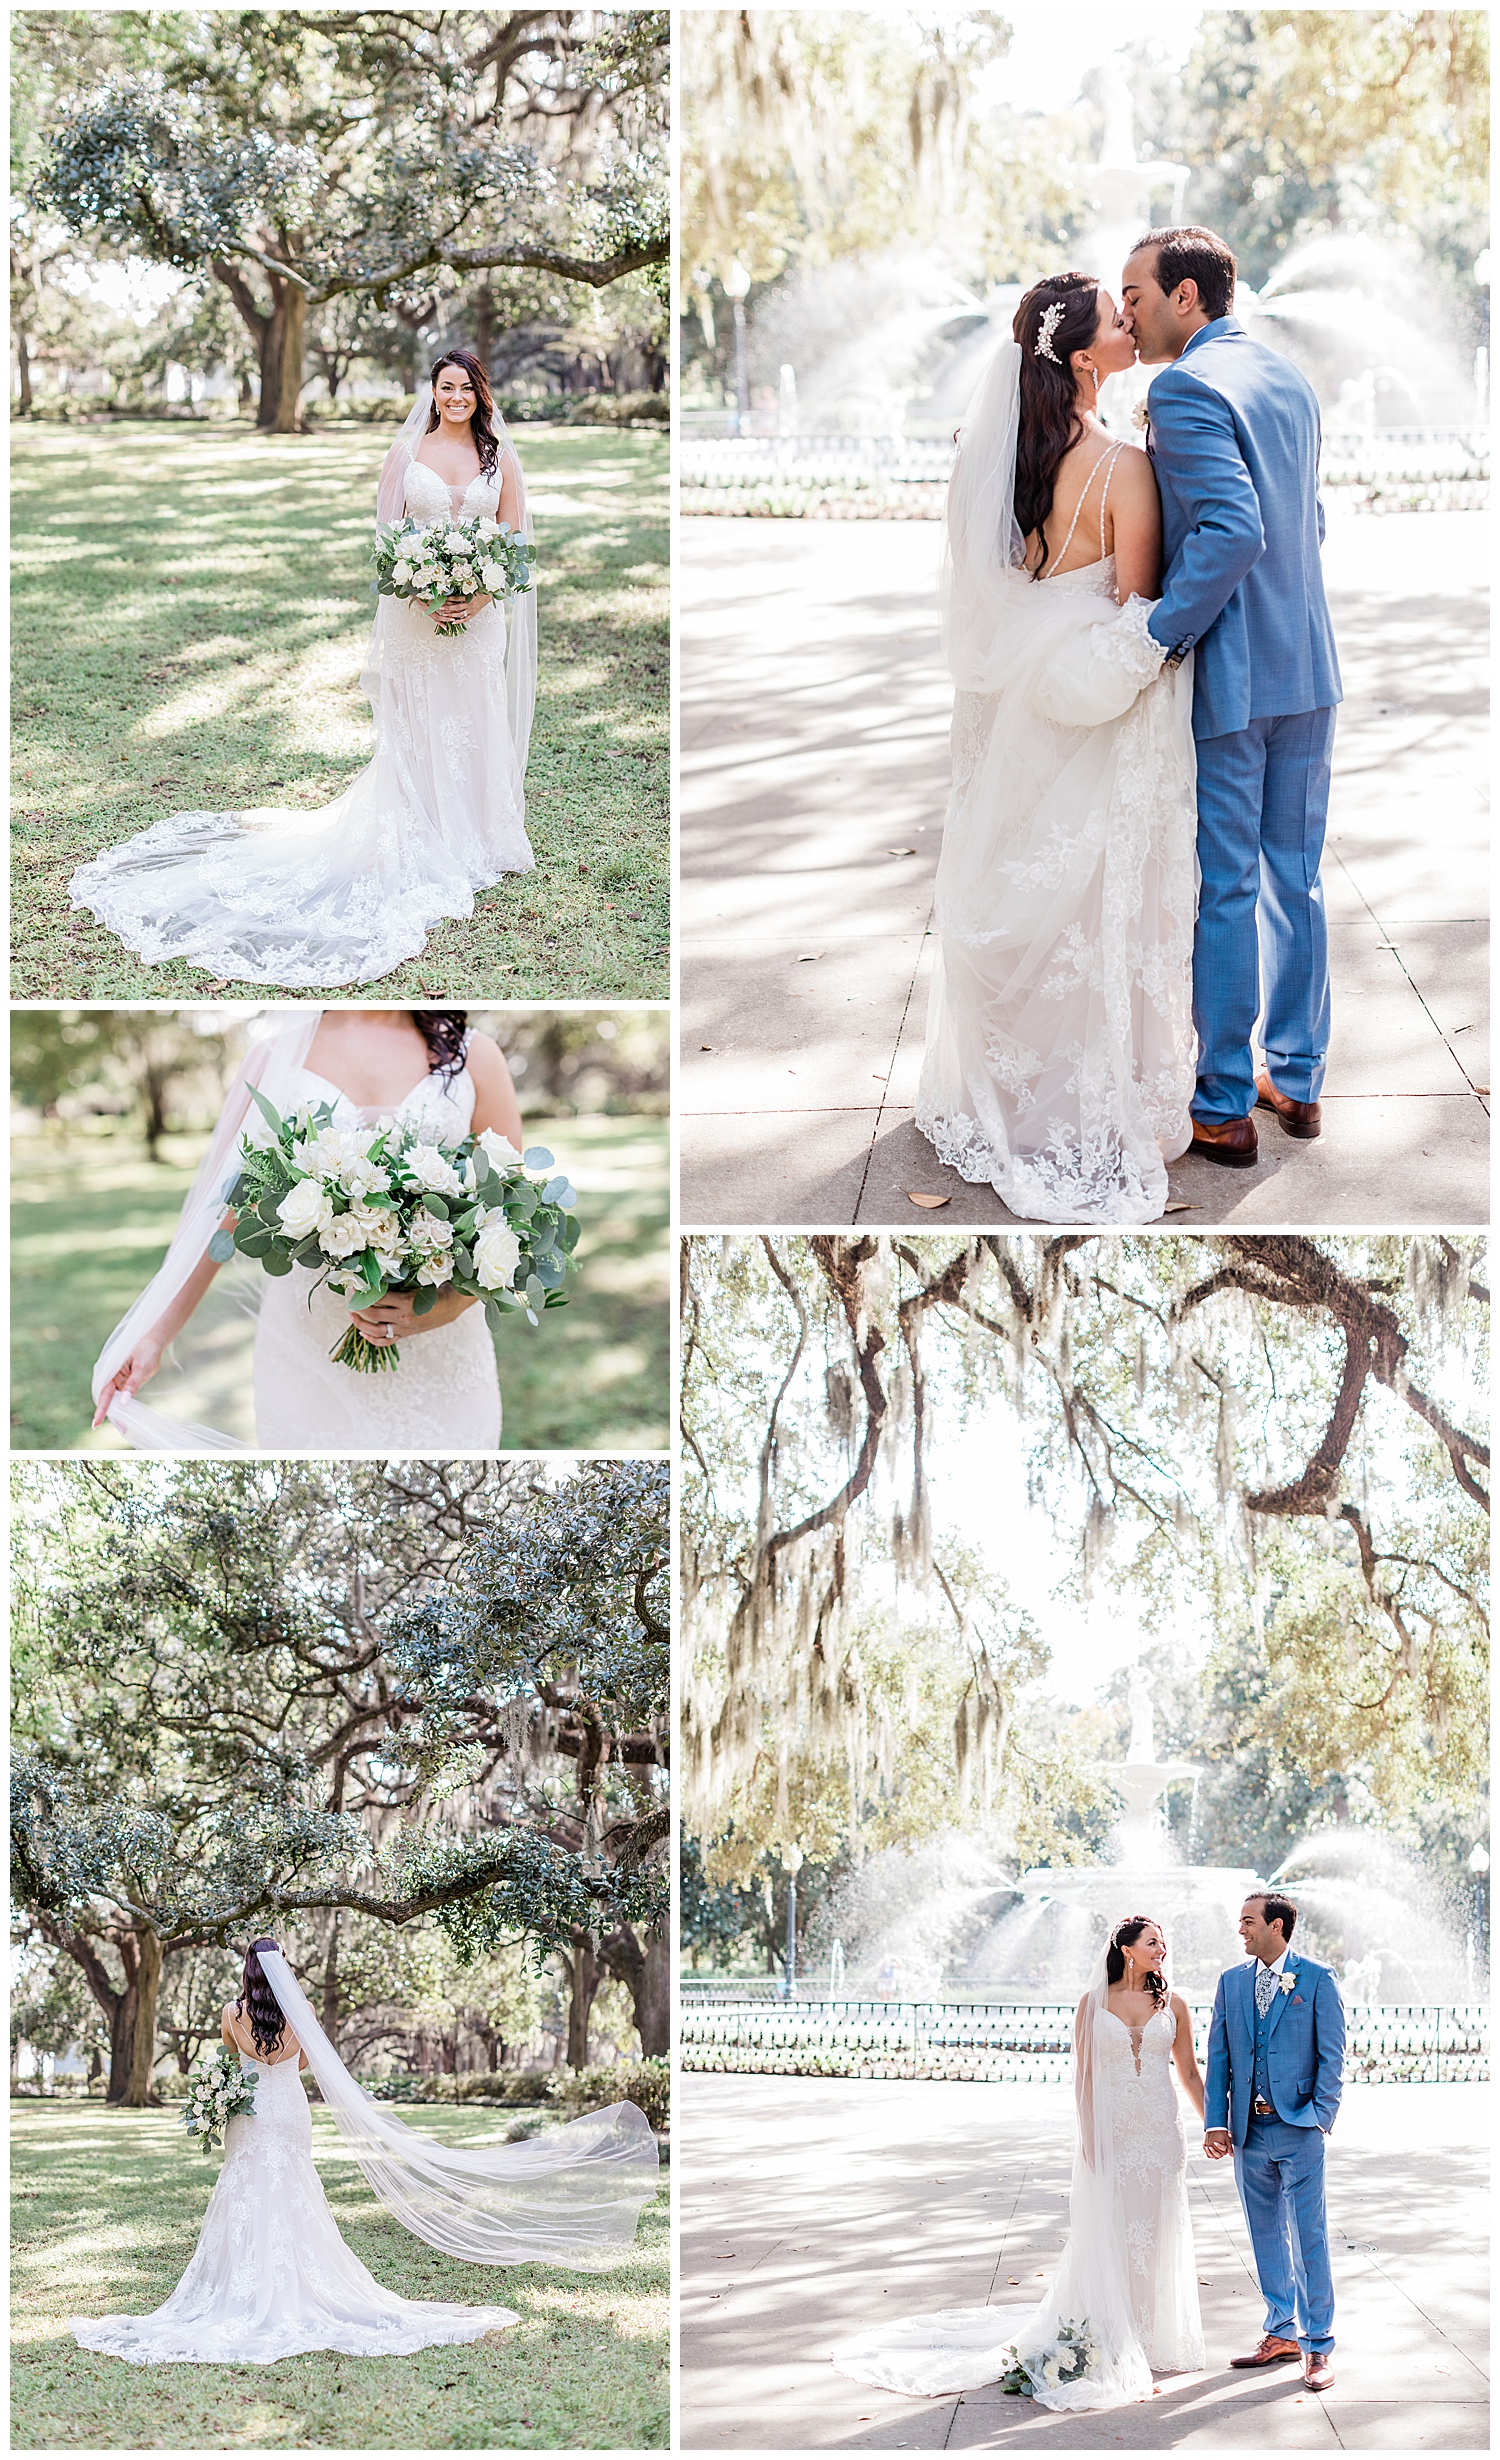 Detail shots and couples portraits at Forsyth Park